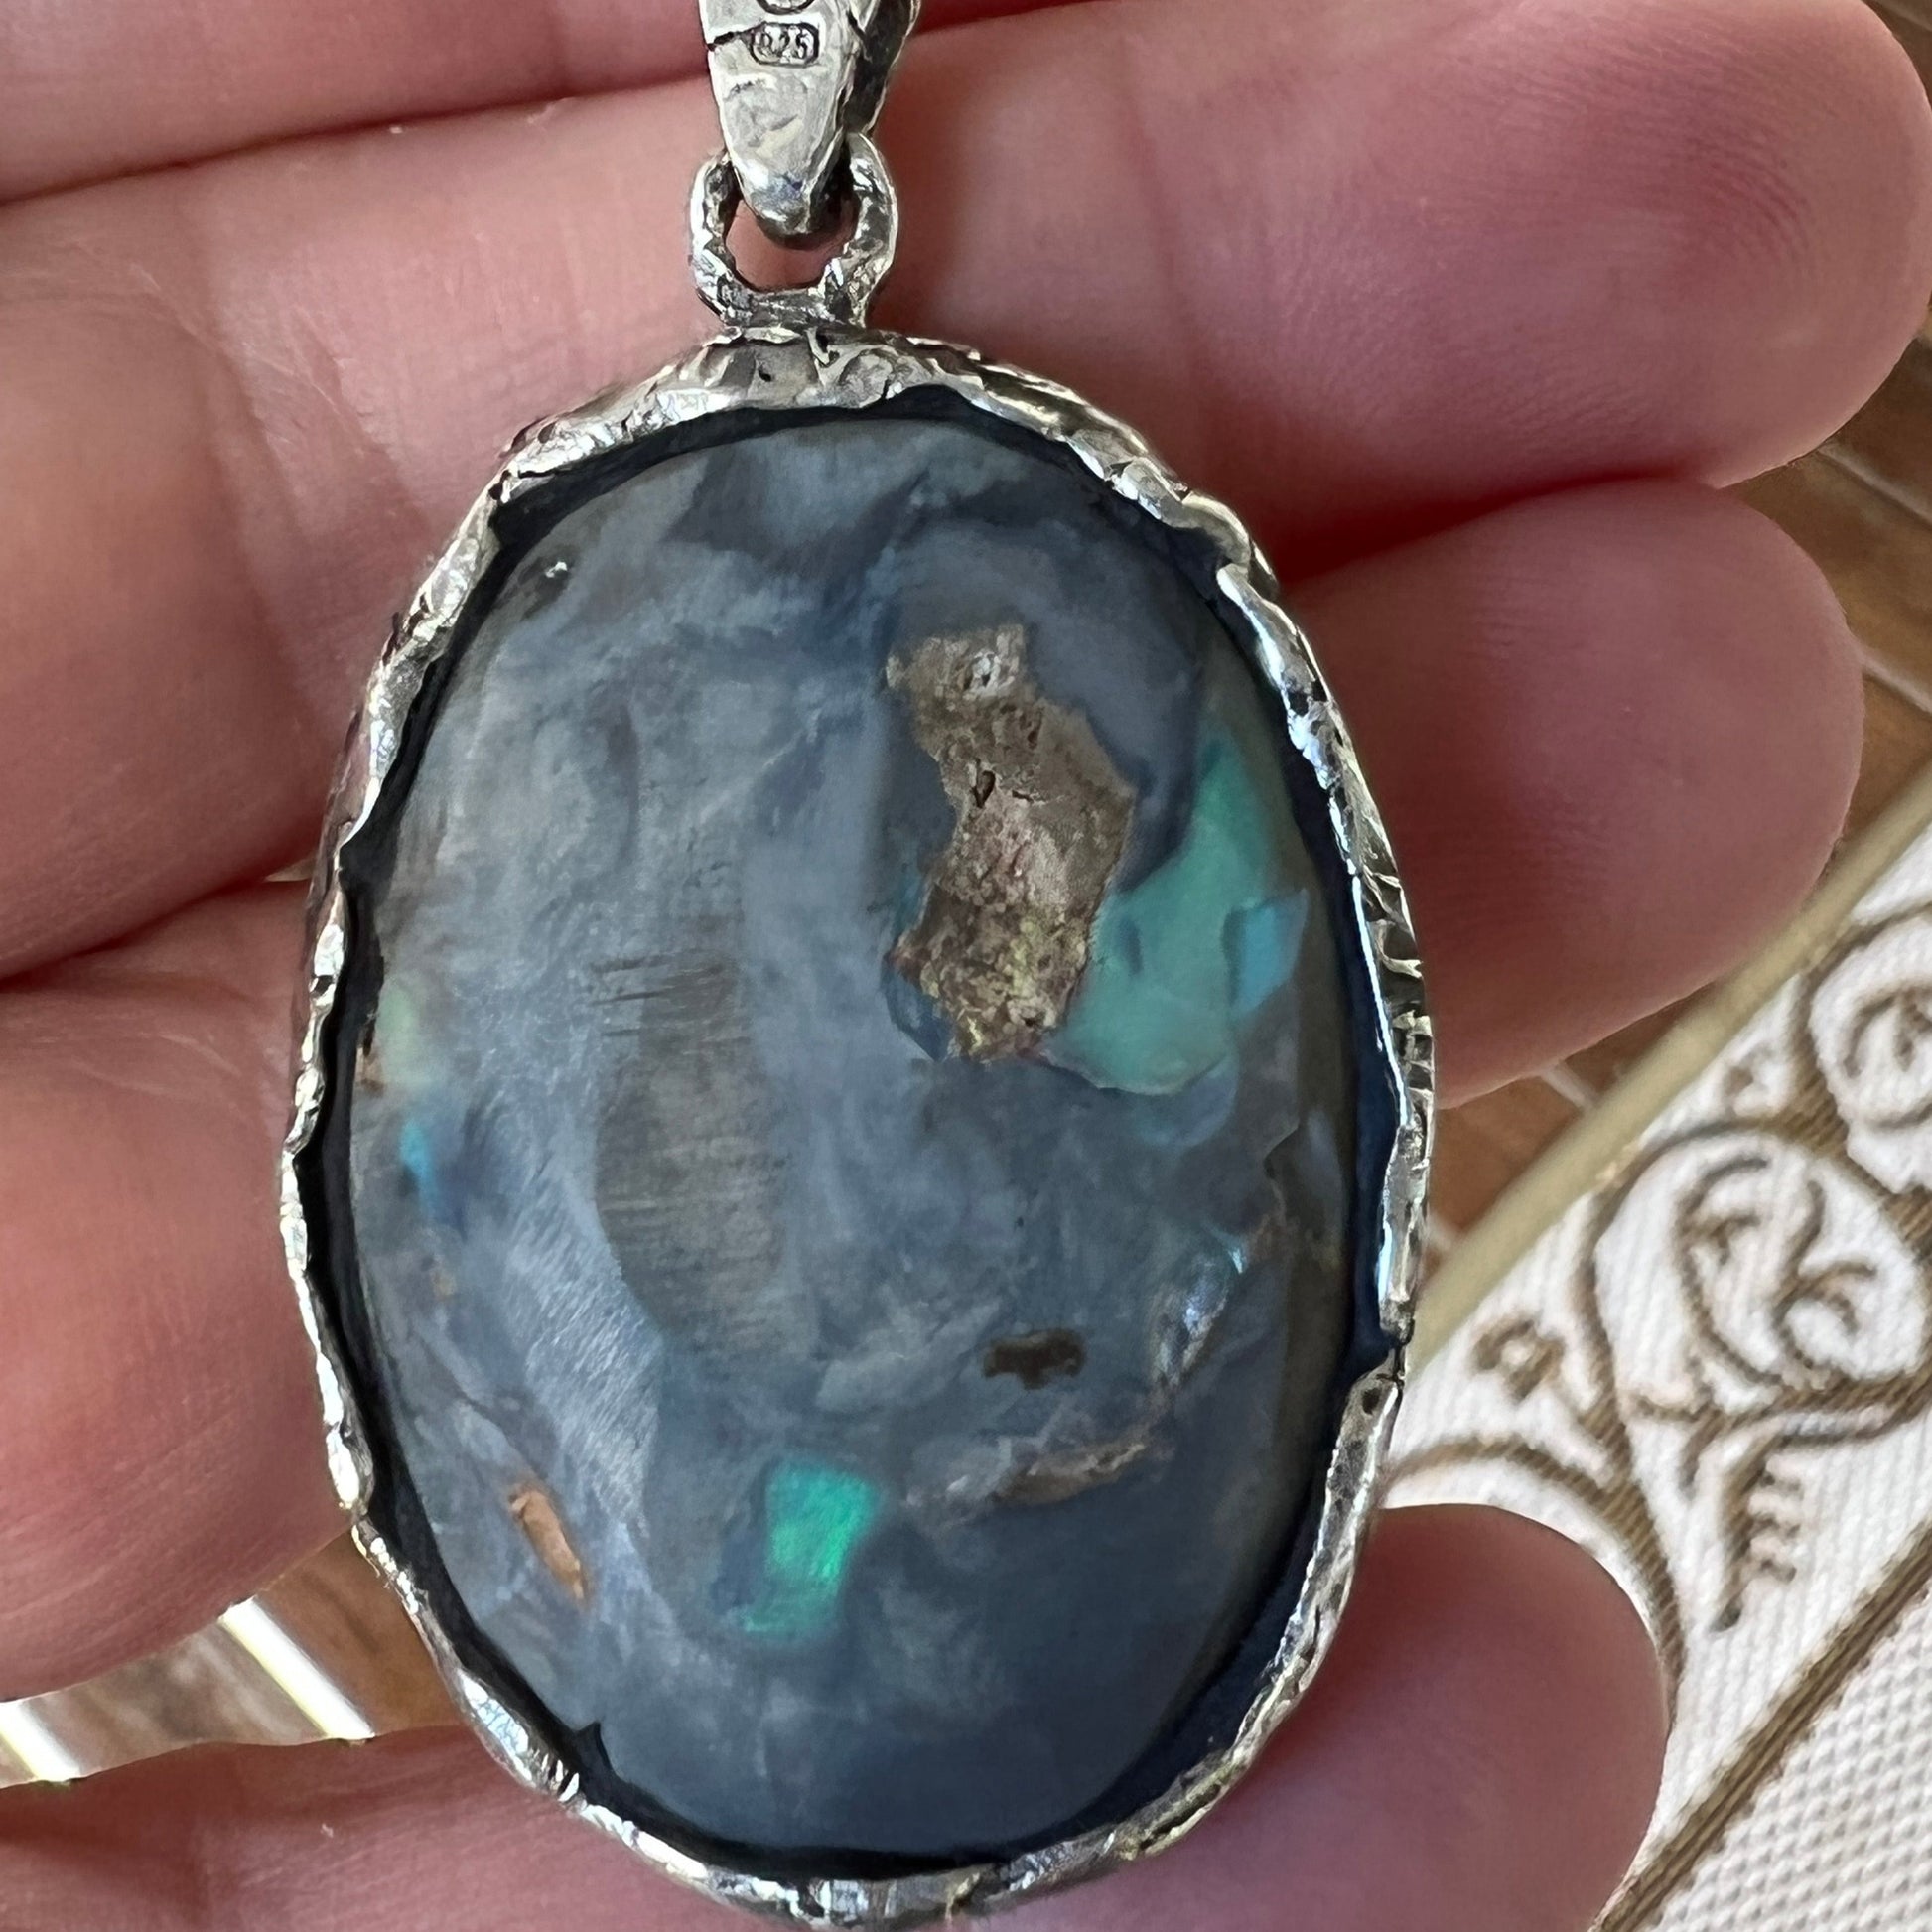 Awesome Lightning Ridge picture stone opal. Mounted with Argentium silver which complements the stone beautifully. Another Sally Fisher designer masterpiece. 